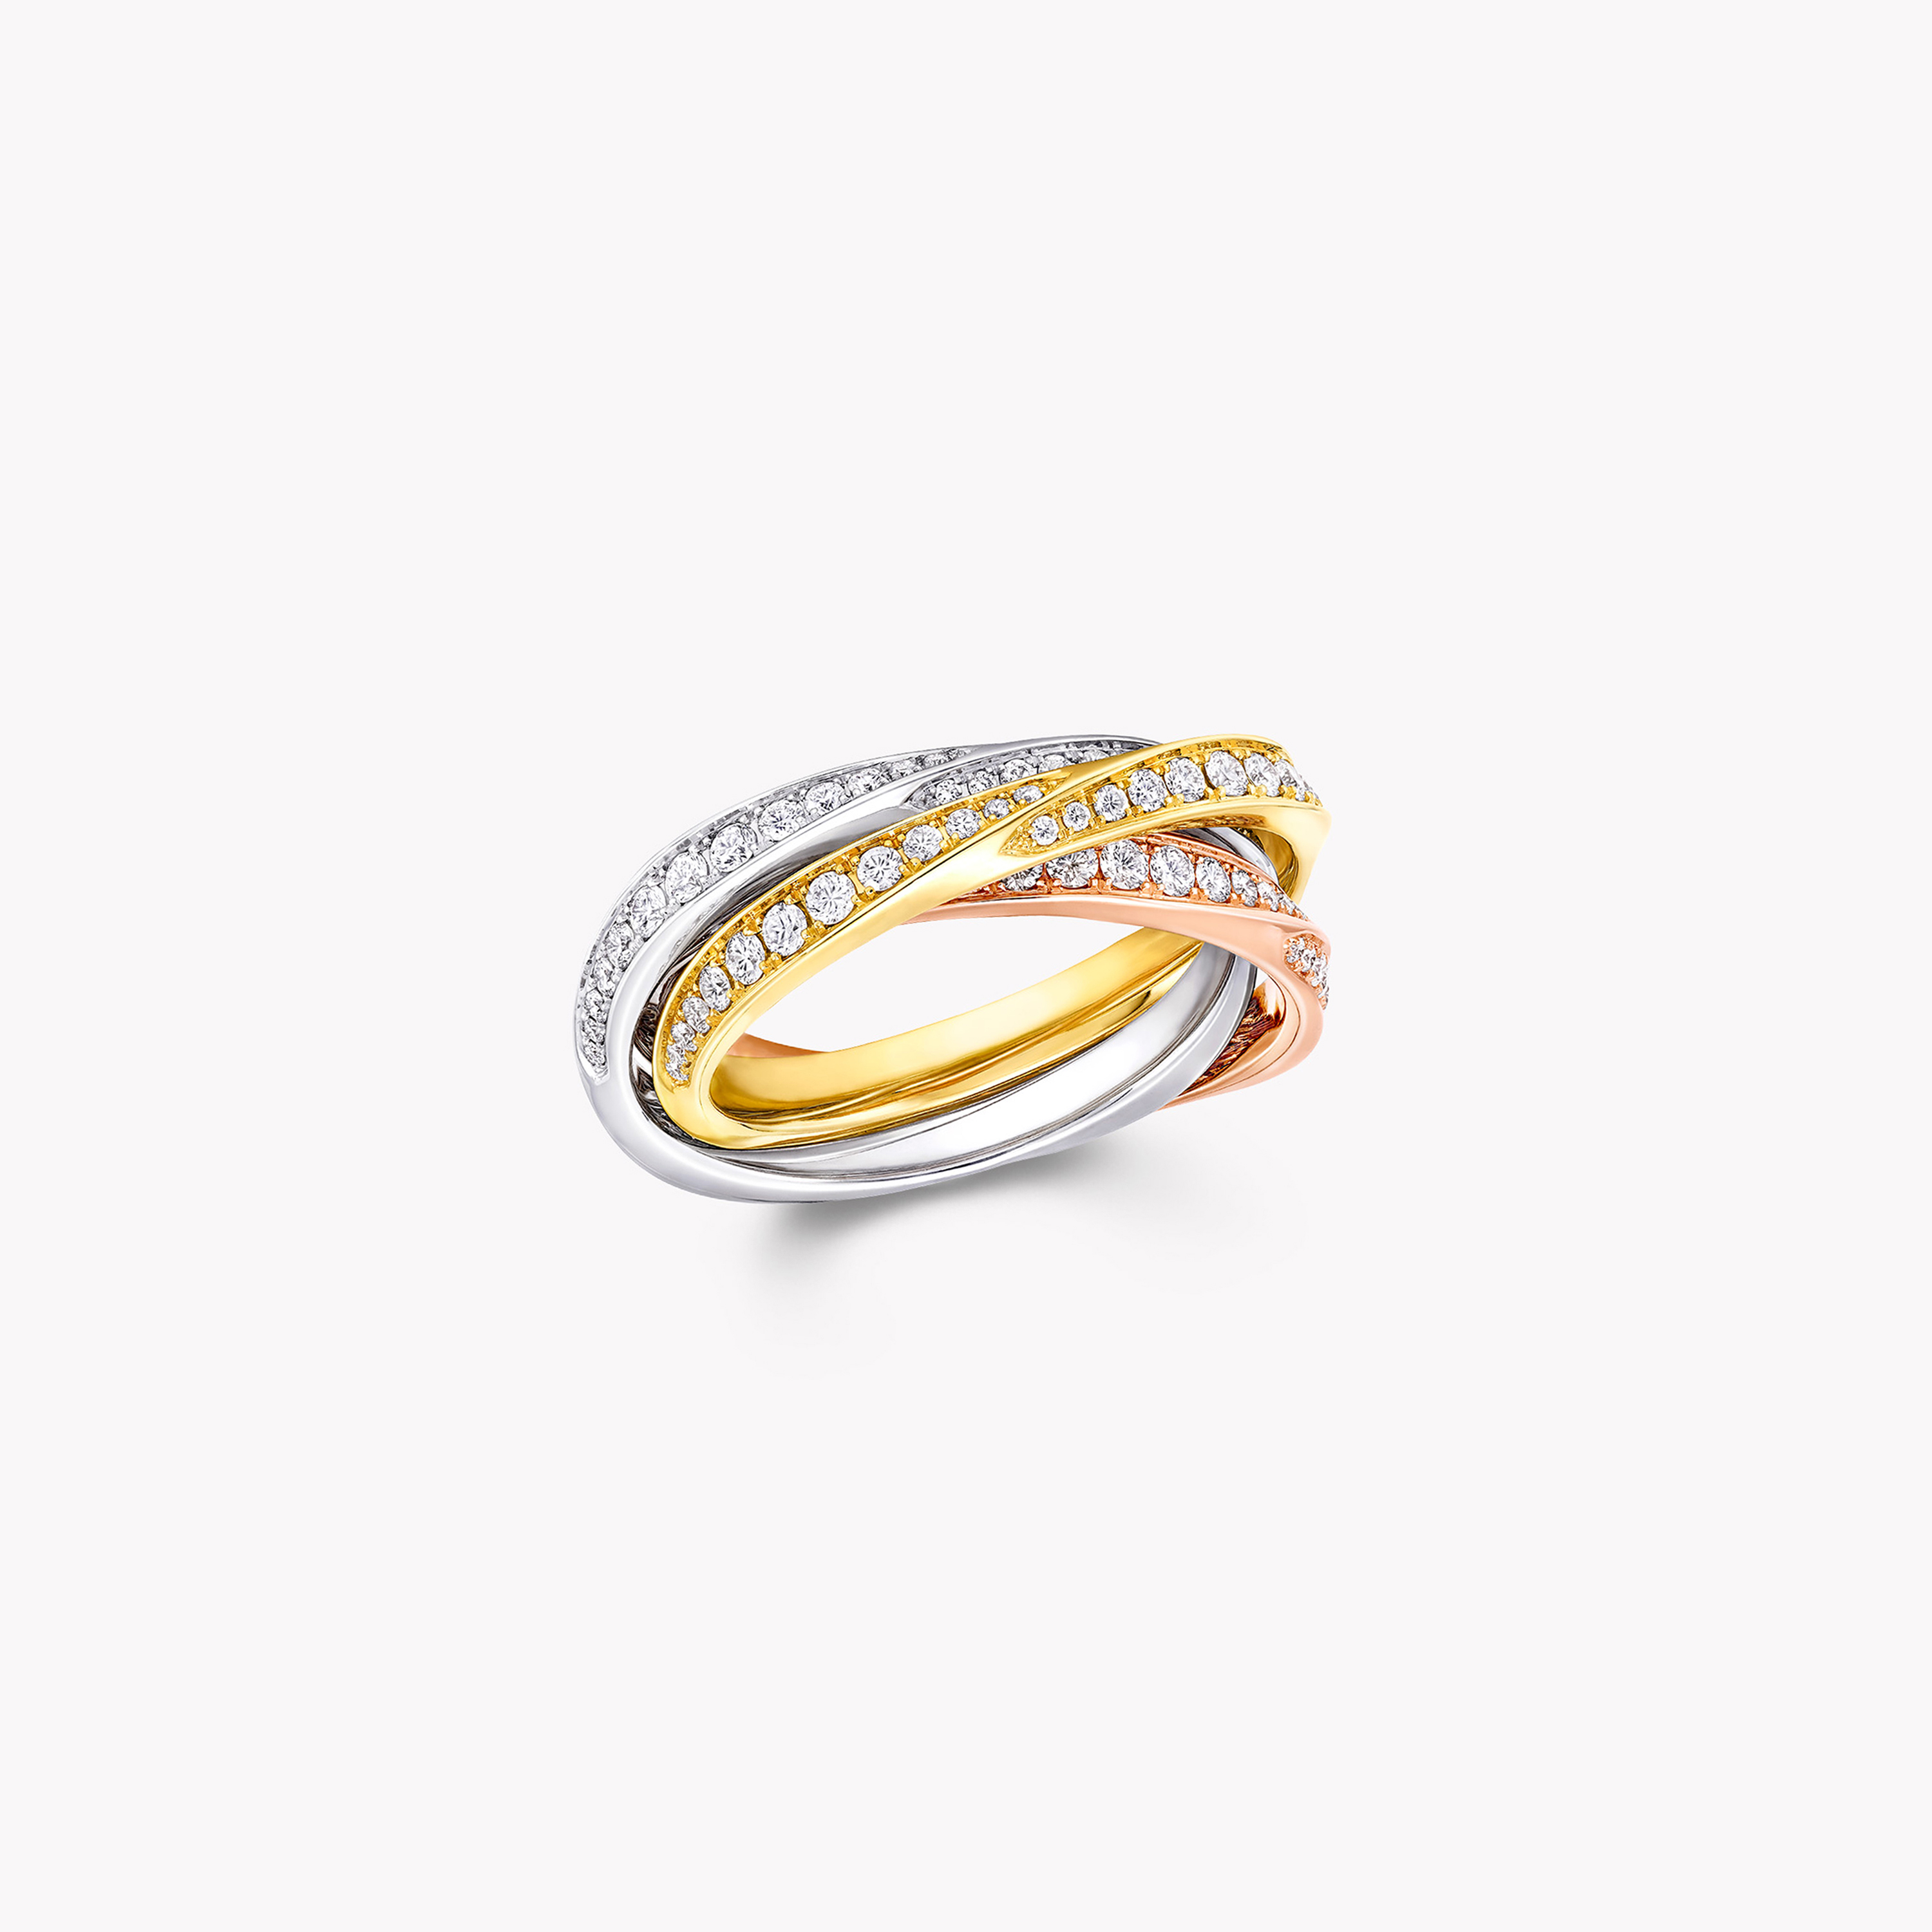 Graff Triple Spiral Pavé Diamond Ring - Rose Gold and White Gold and Yellow Gold